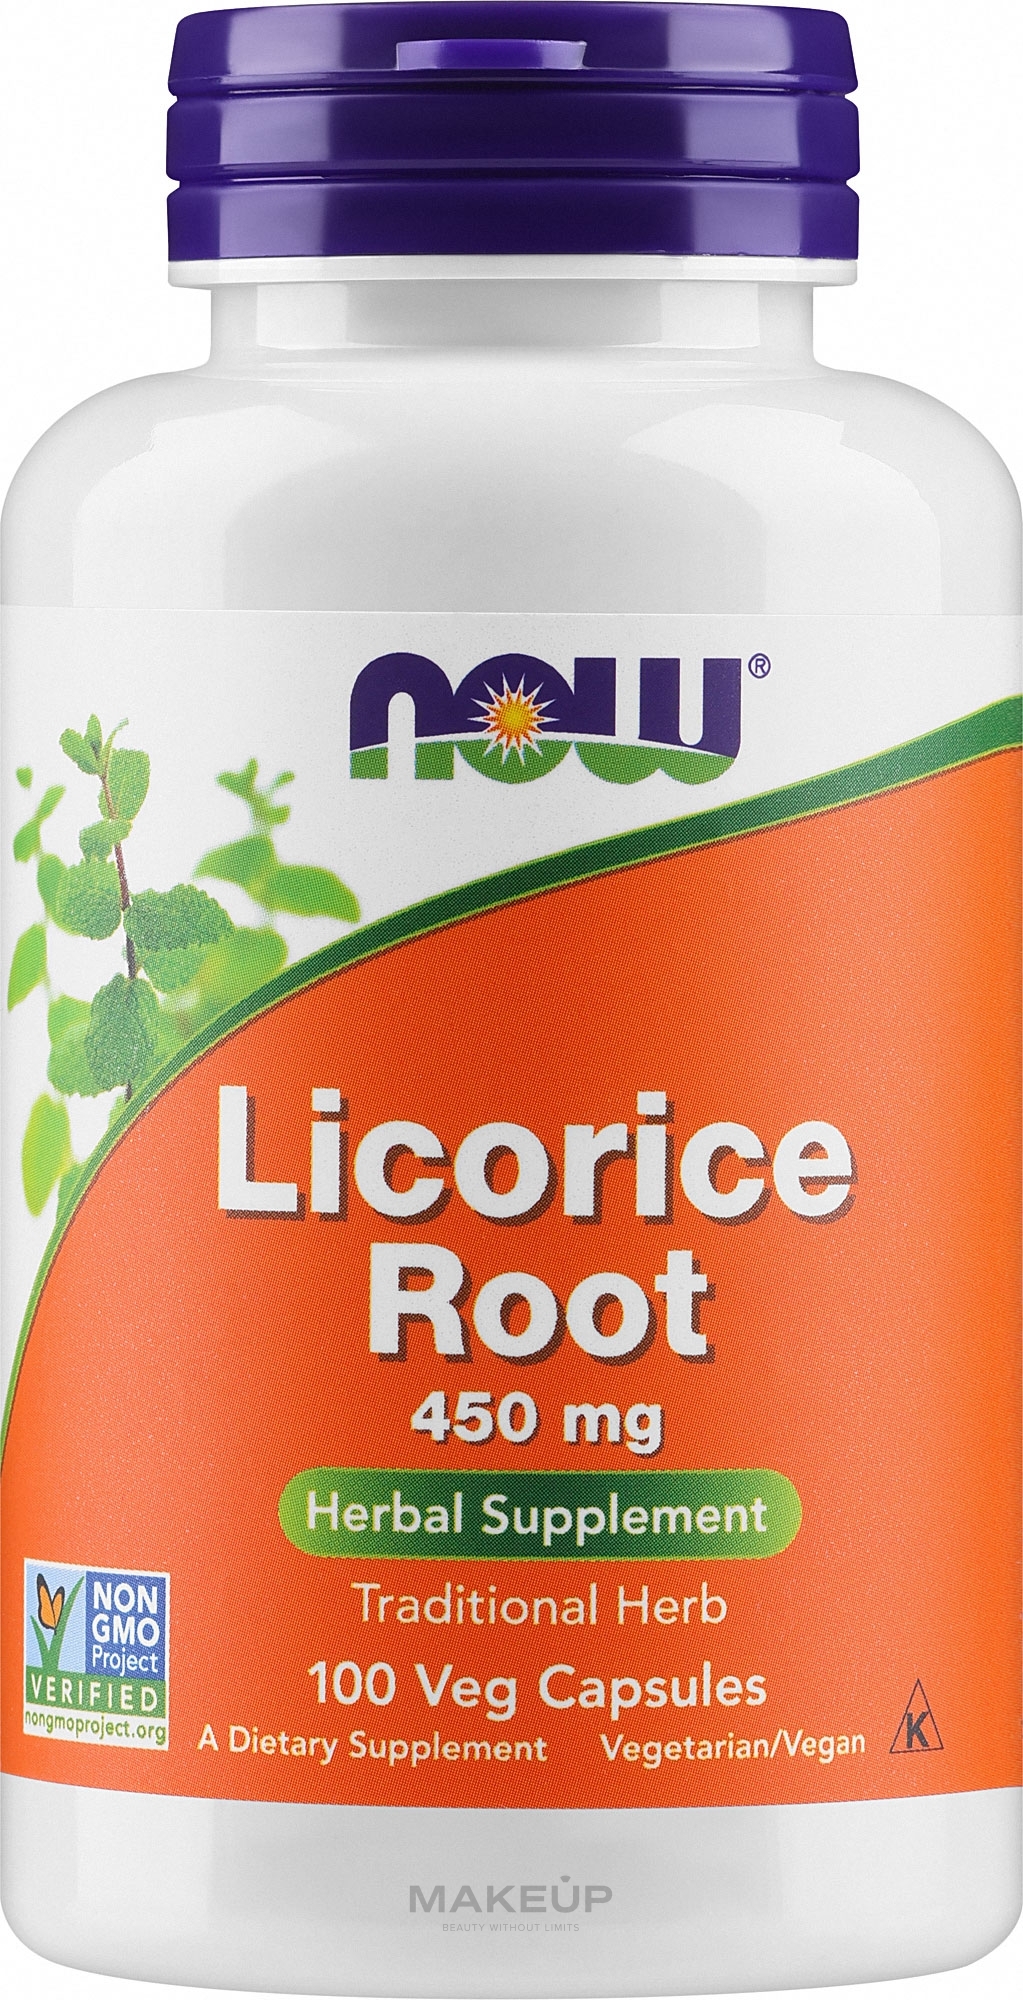 Dietary Supplement "Licorice Root", 450mg - Now Foods Licorice Root Capsules — photo 100 szt.